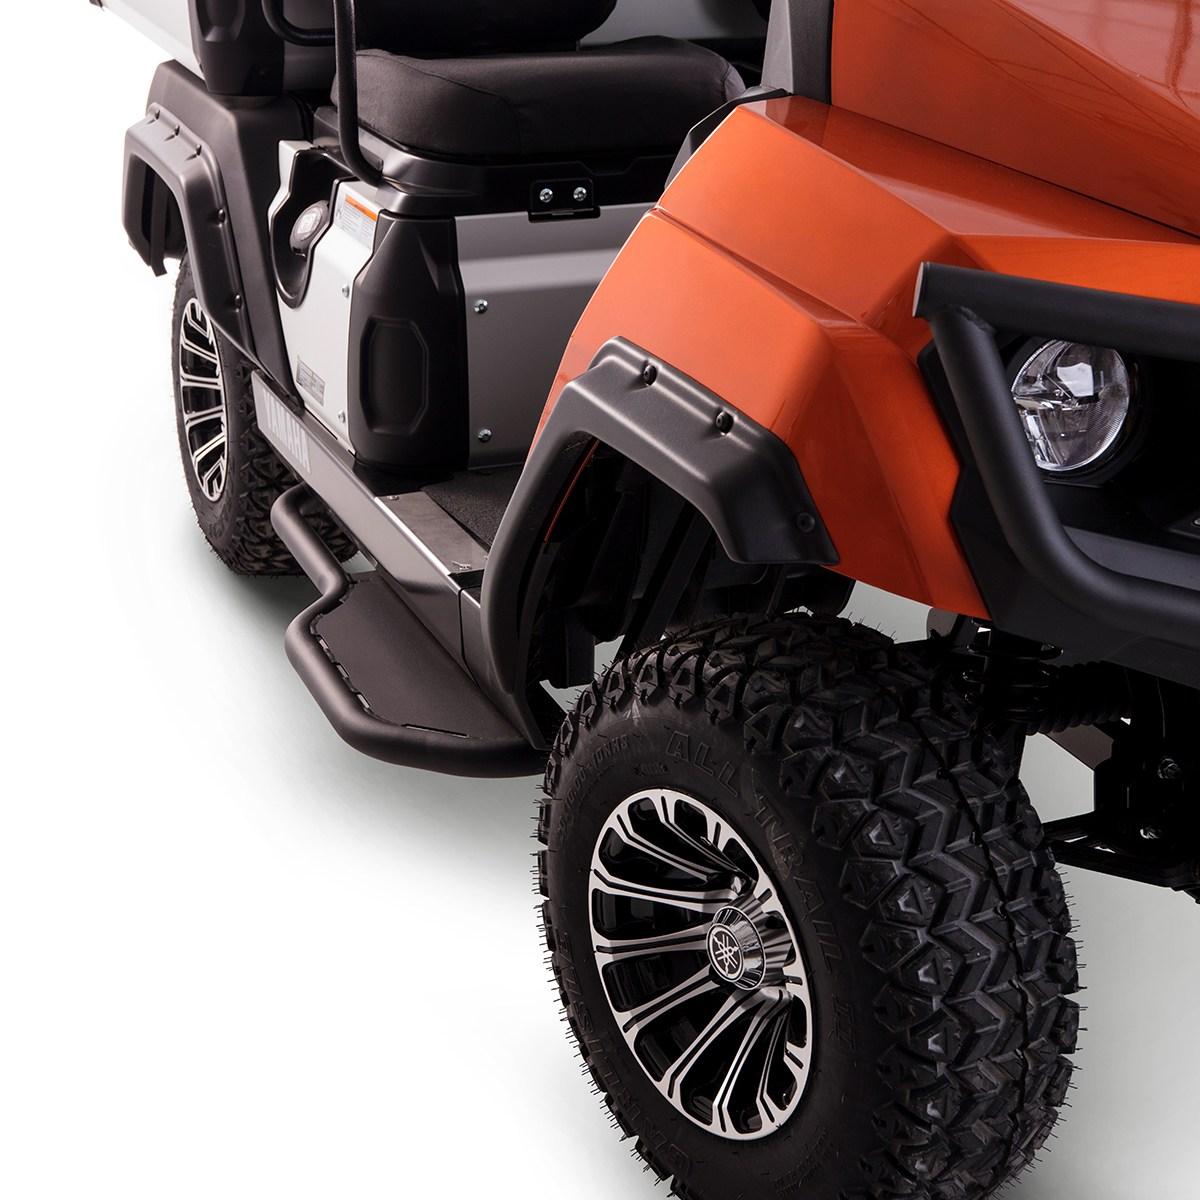 Defend yourself and your UMAX against mud, water, and debris with this four-piece fender kit. This kit is made of highly durable materials and made to integrate perfectly with the hard-work-ready look and feel of your UMAX.